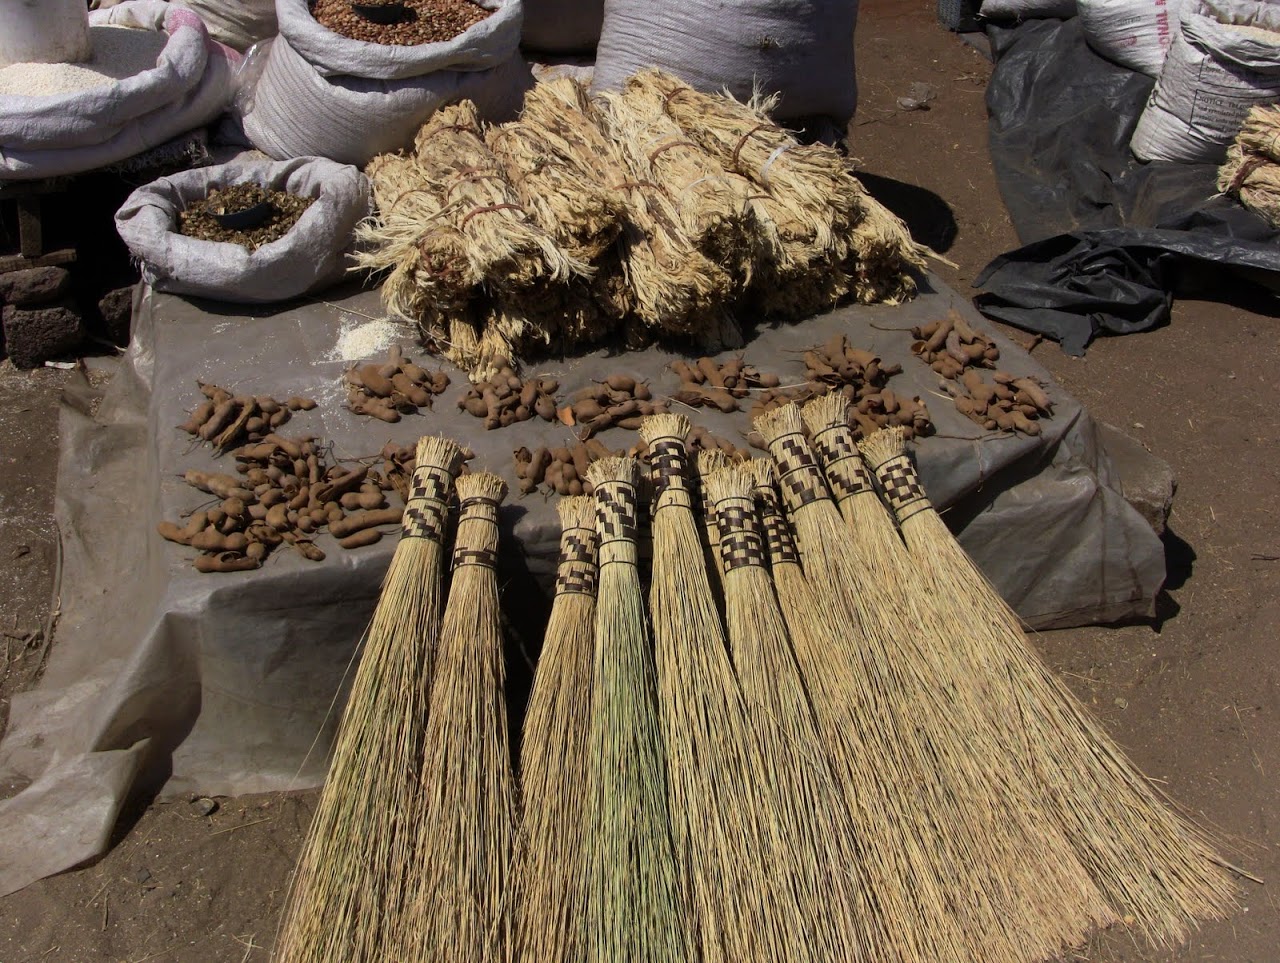 Brooms and tamarind pods